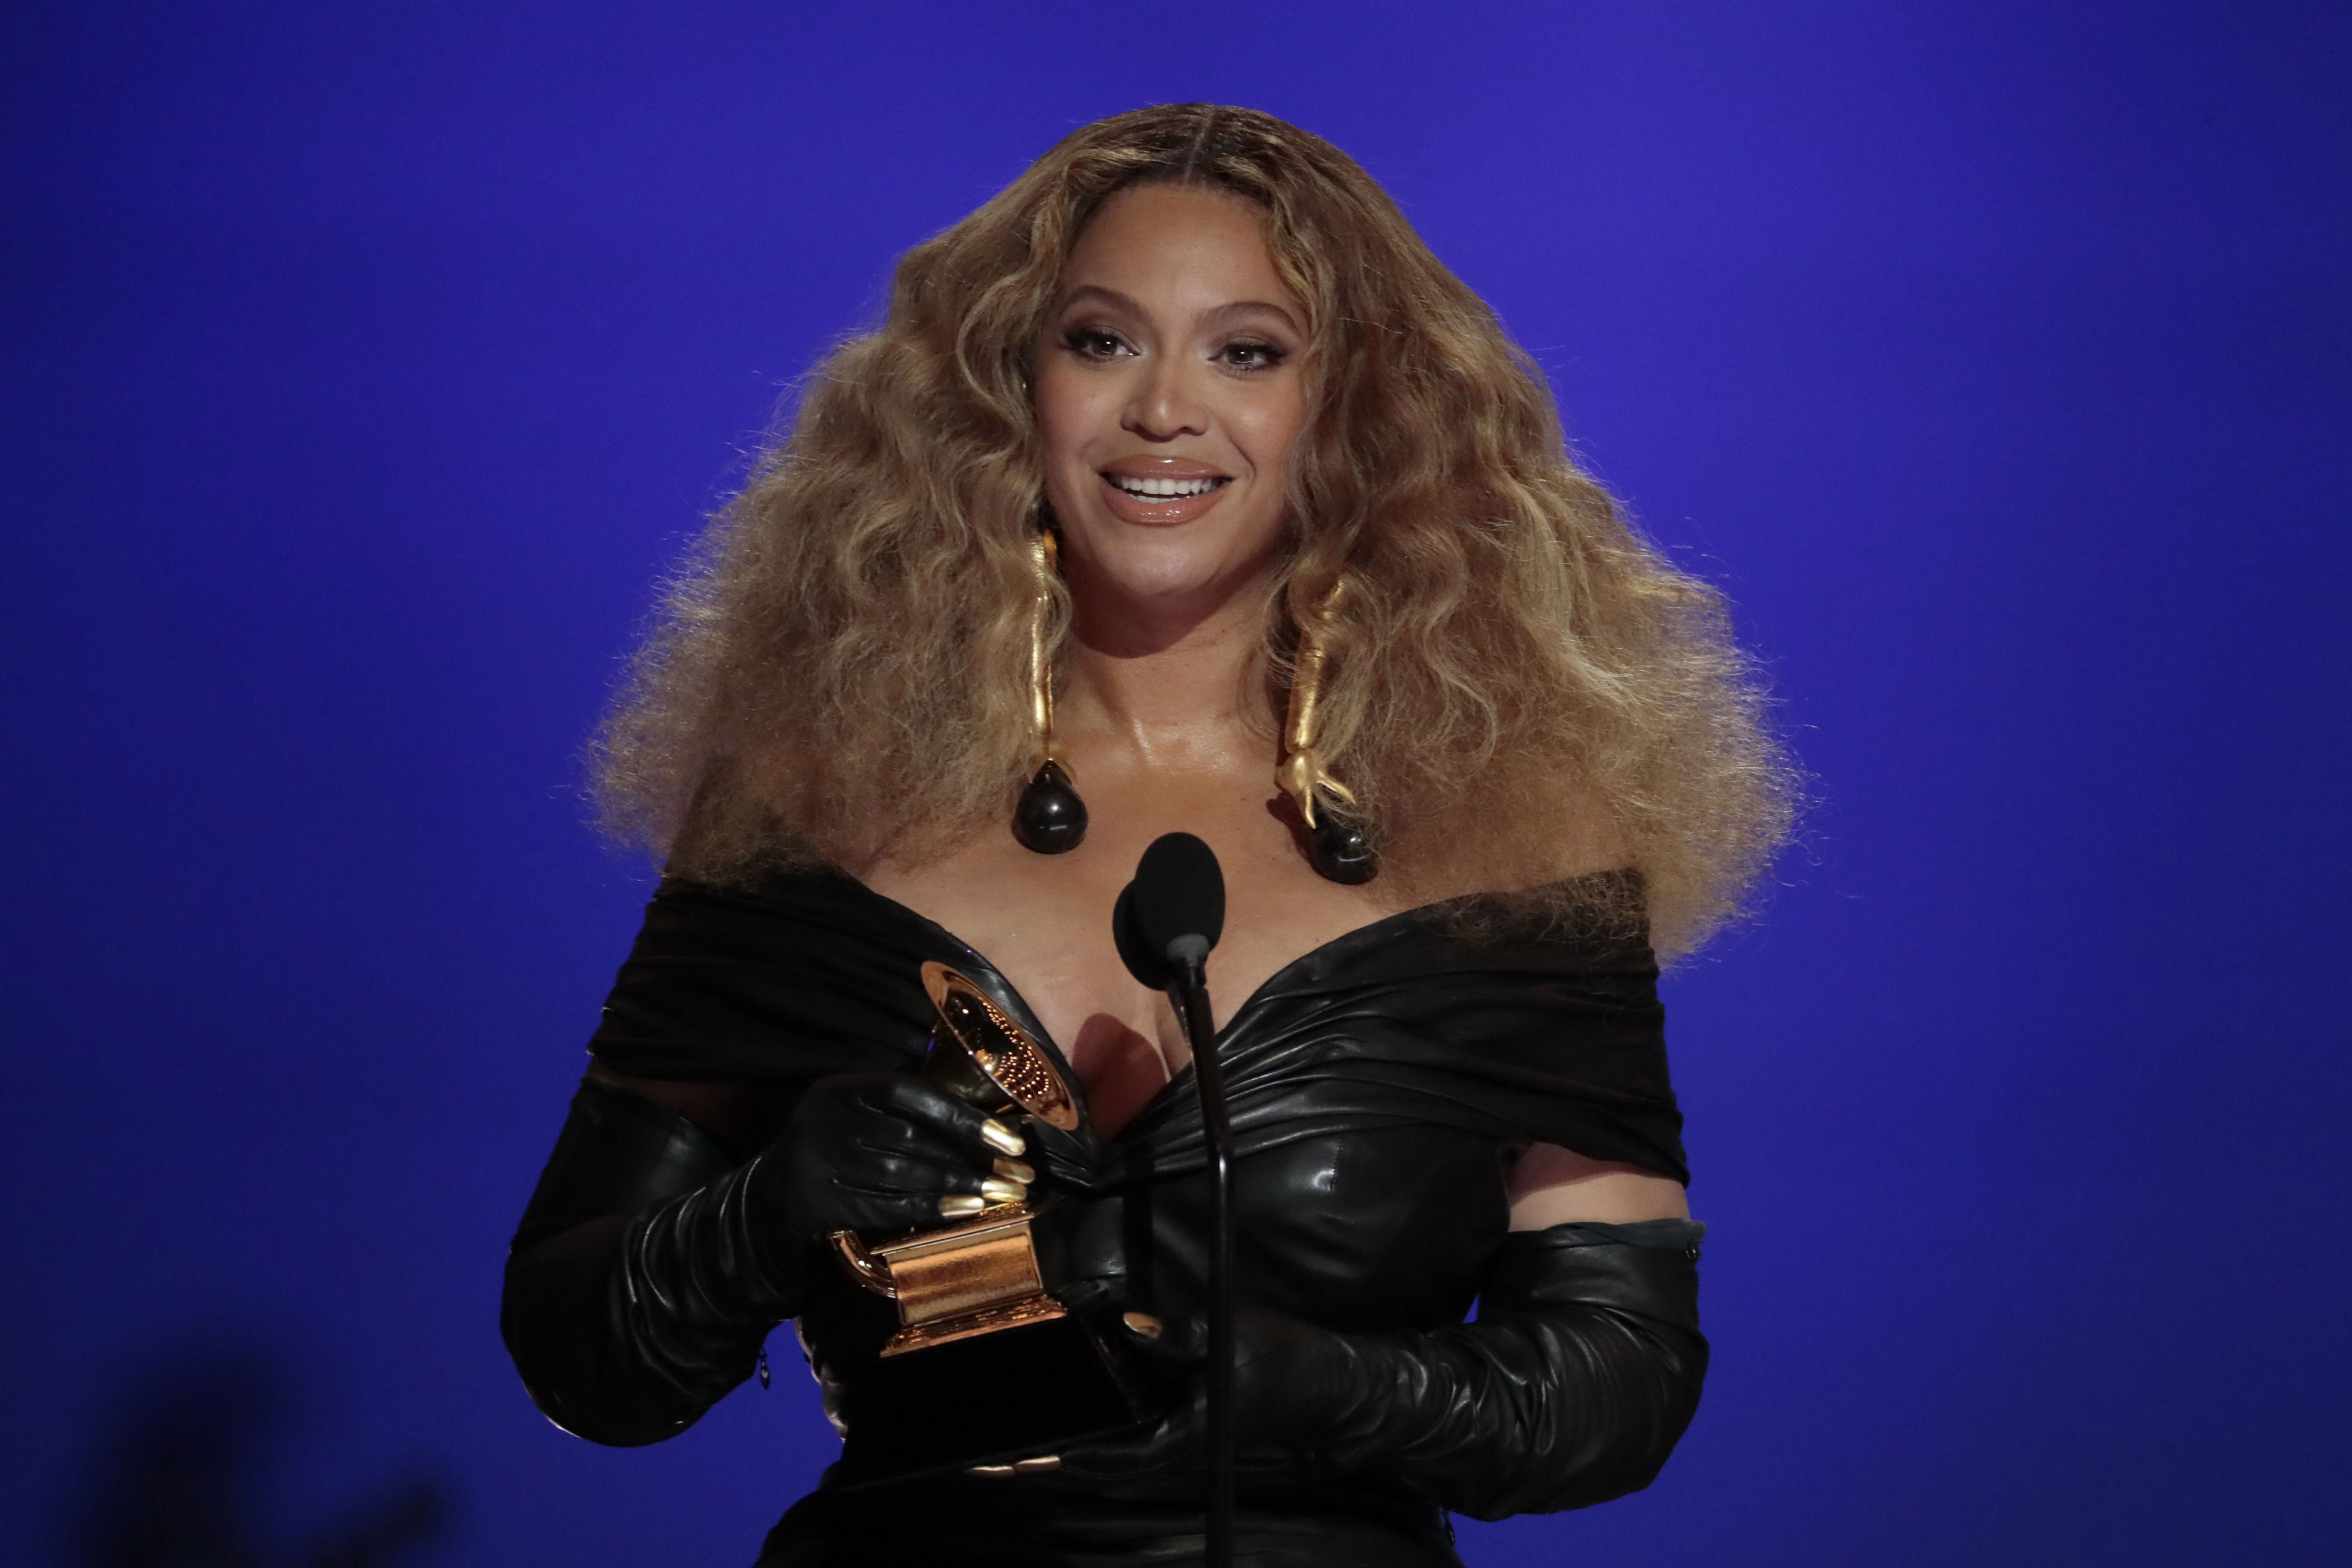 <p>Beyonce and her husband, JAY-Z, are tied for the most Grammy nominations in history with 88 each as of early 2024. <span>(Her nominations have come as both a solo artist, as a member of Destiny's Child and as half of The Carters with her hubby.</span>) </p><p>When it comes to wins, though, no one tops the Queen B: In 2021, she became <a href="https://www.wonderwall.com/awards-events/grammys/2021-grammys-everything-that-had-people-talking-435587.gallery?photoId=435993">the most decorated woman in Grammy history</a> when she took home her fourth award of the night -- and 28th Grammy overall -- during the <a href="https://www.wonderwall.com/awards-events/grammys/2021-grammy-awards-see-all-the-pics-from-the-red-carpet-435592.gallery">63rd annual ceremony</a>, surpassing the record (27) previously set by bluegrass artist Alison Krauss. Then in 2023, she became the most awarded person of any gender when she took home her 32nd Grammy, breaking conductor Georg Solti's record of 31 wins.</p>